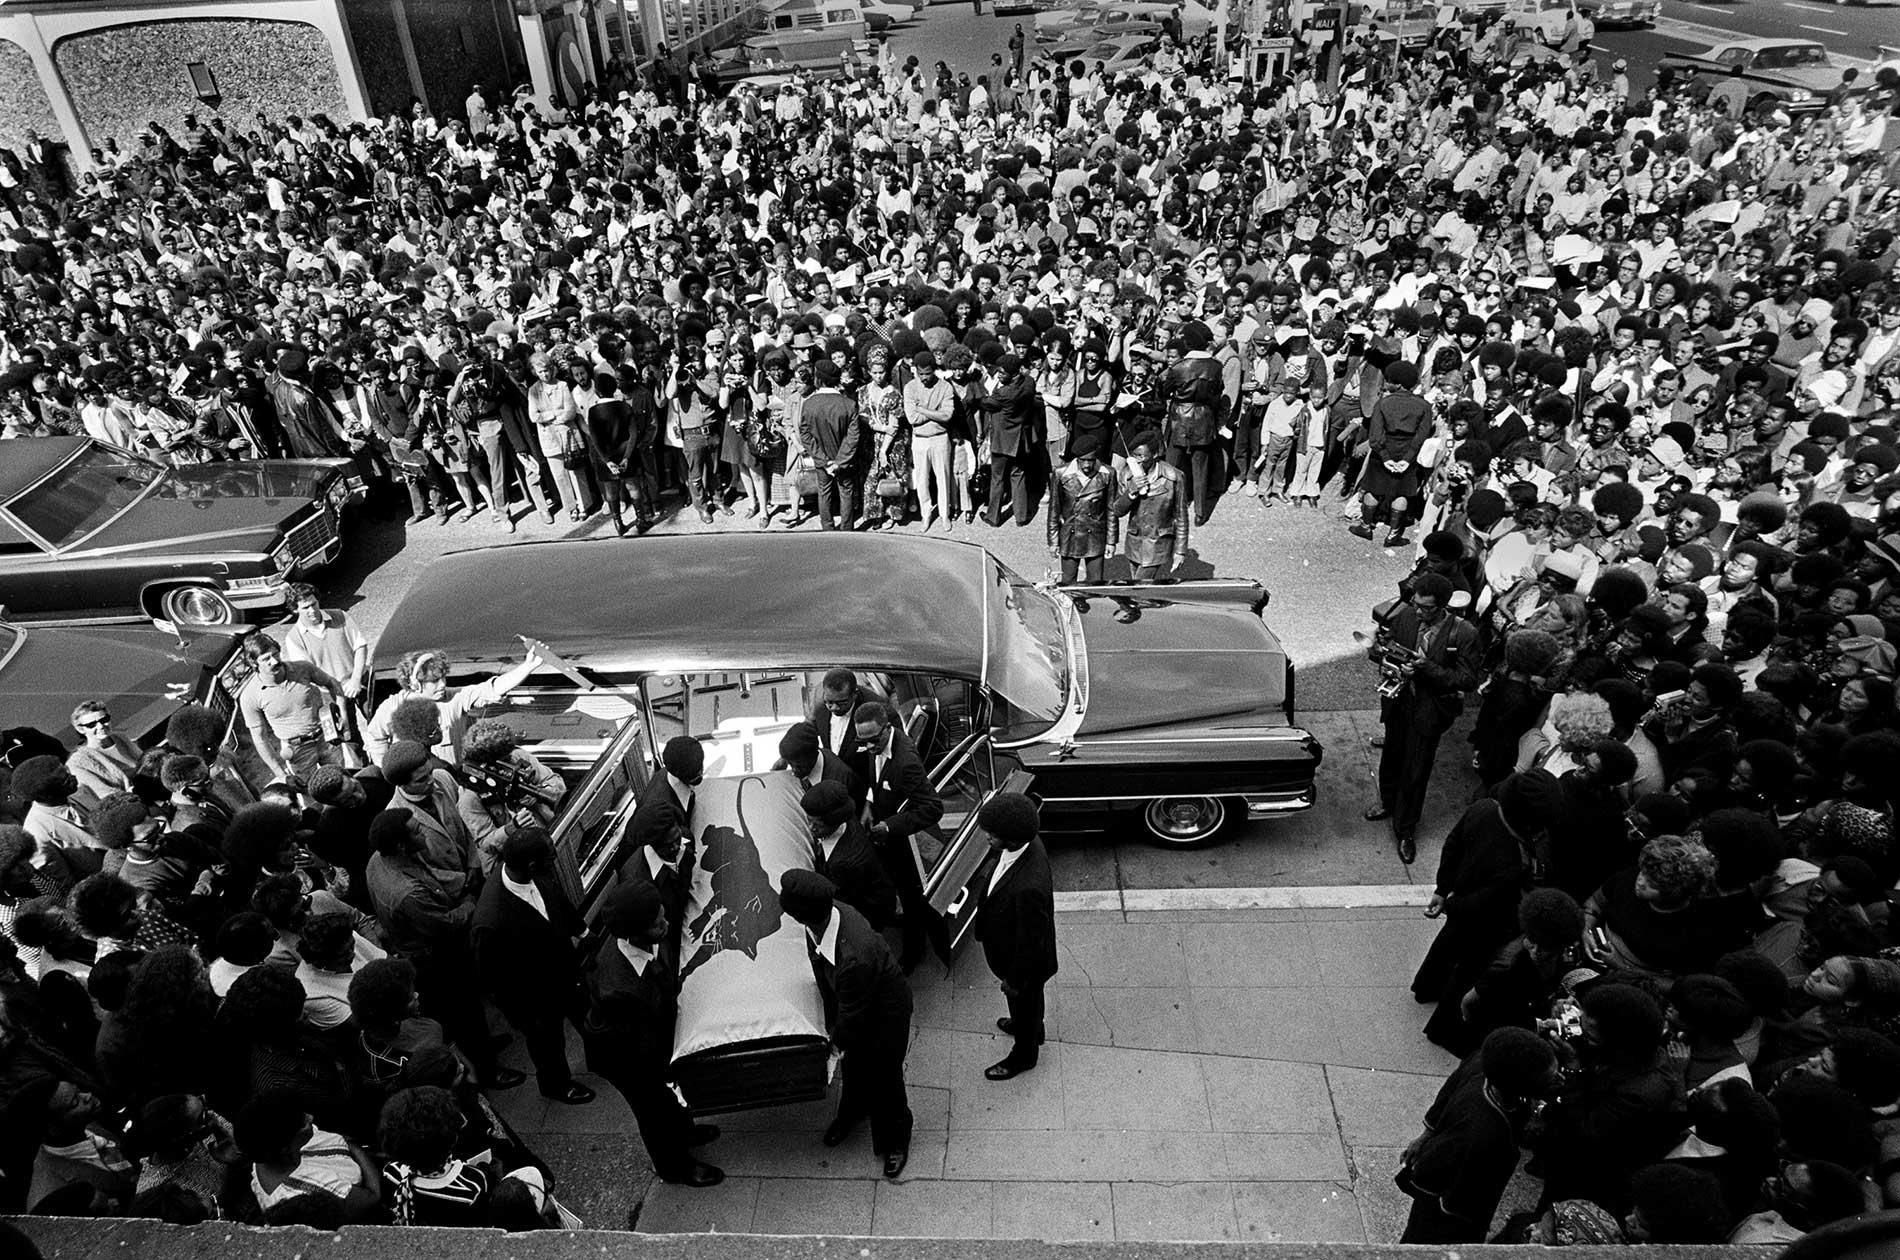 A crowd of people surrounding a casket being carried into a car